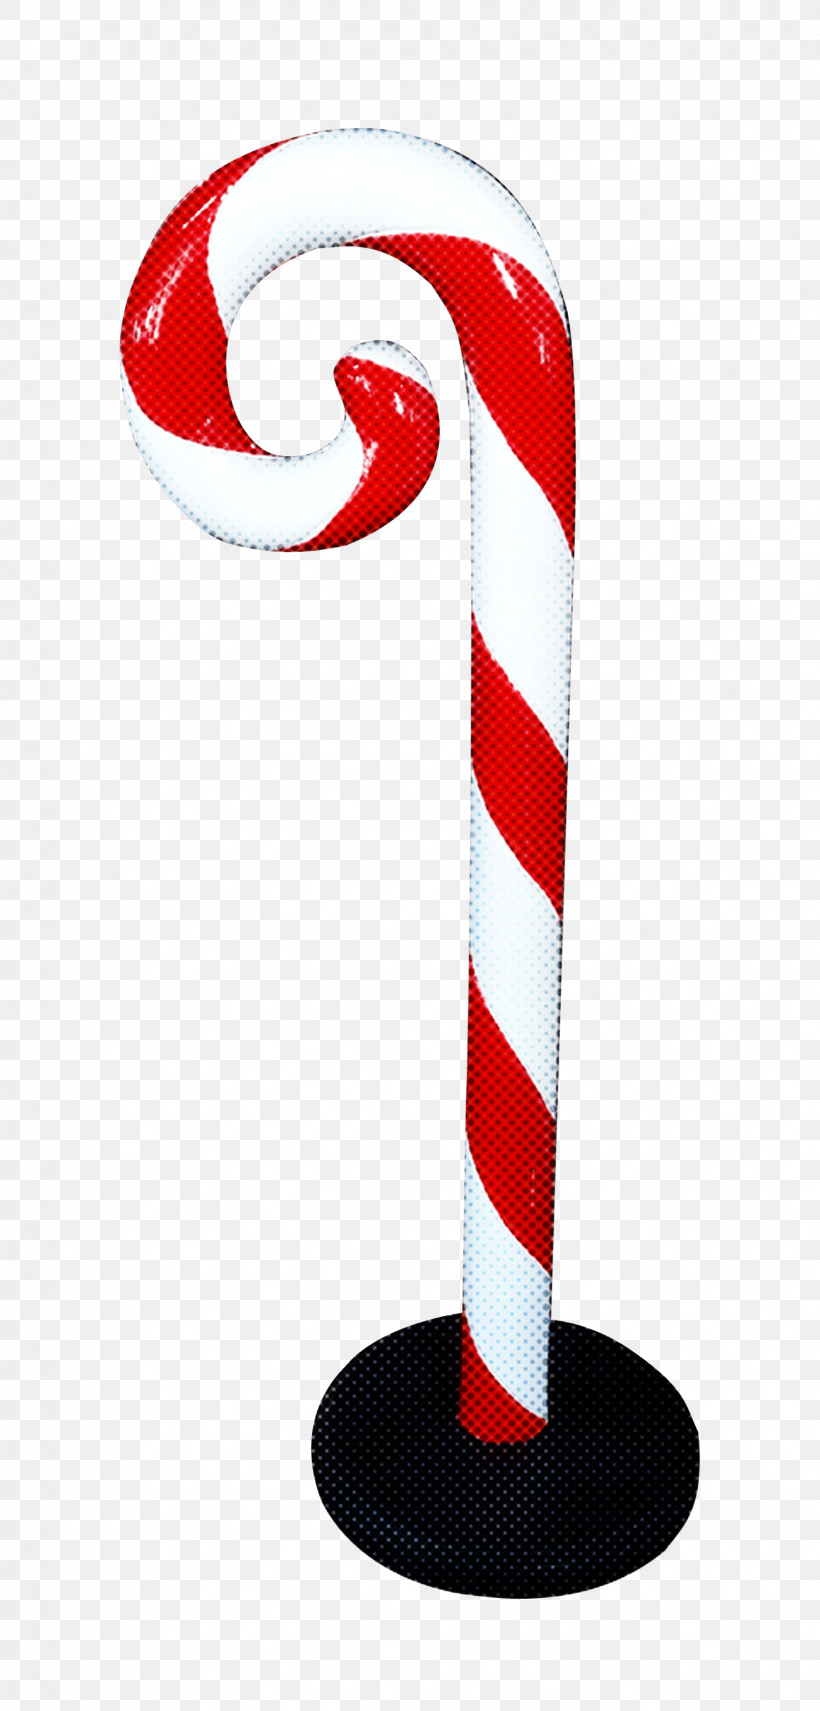 Candy Cane, PNG, 1632x3407px, Candy Cane, Christmas, Holiday Download Free